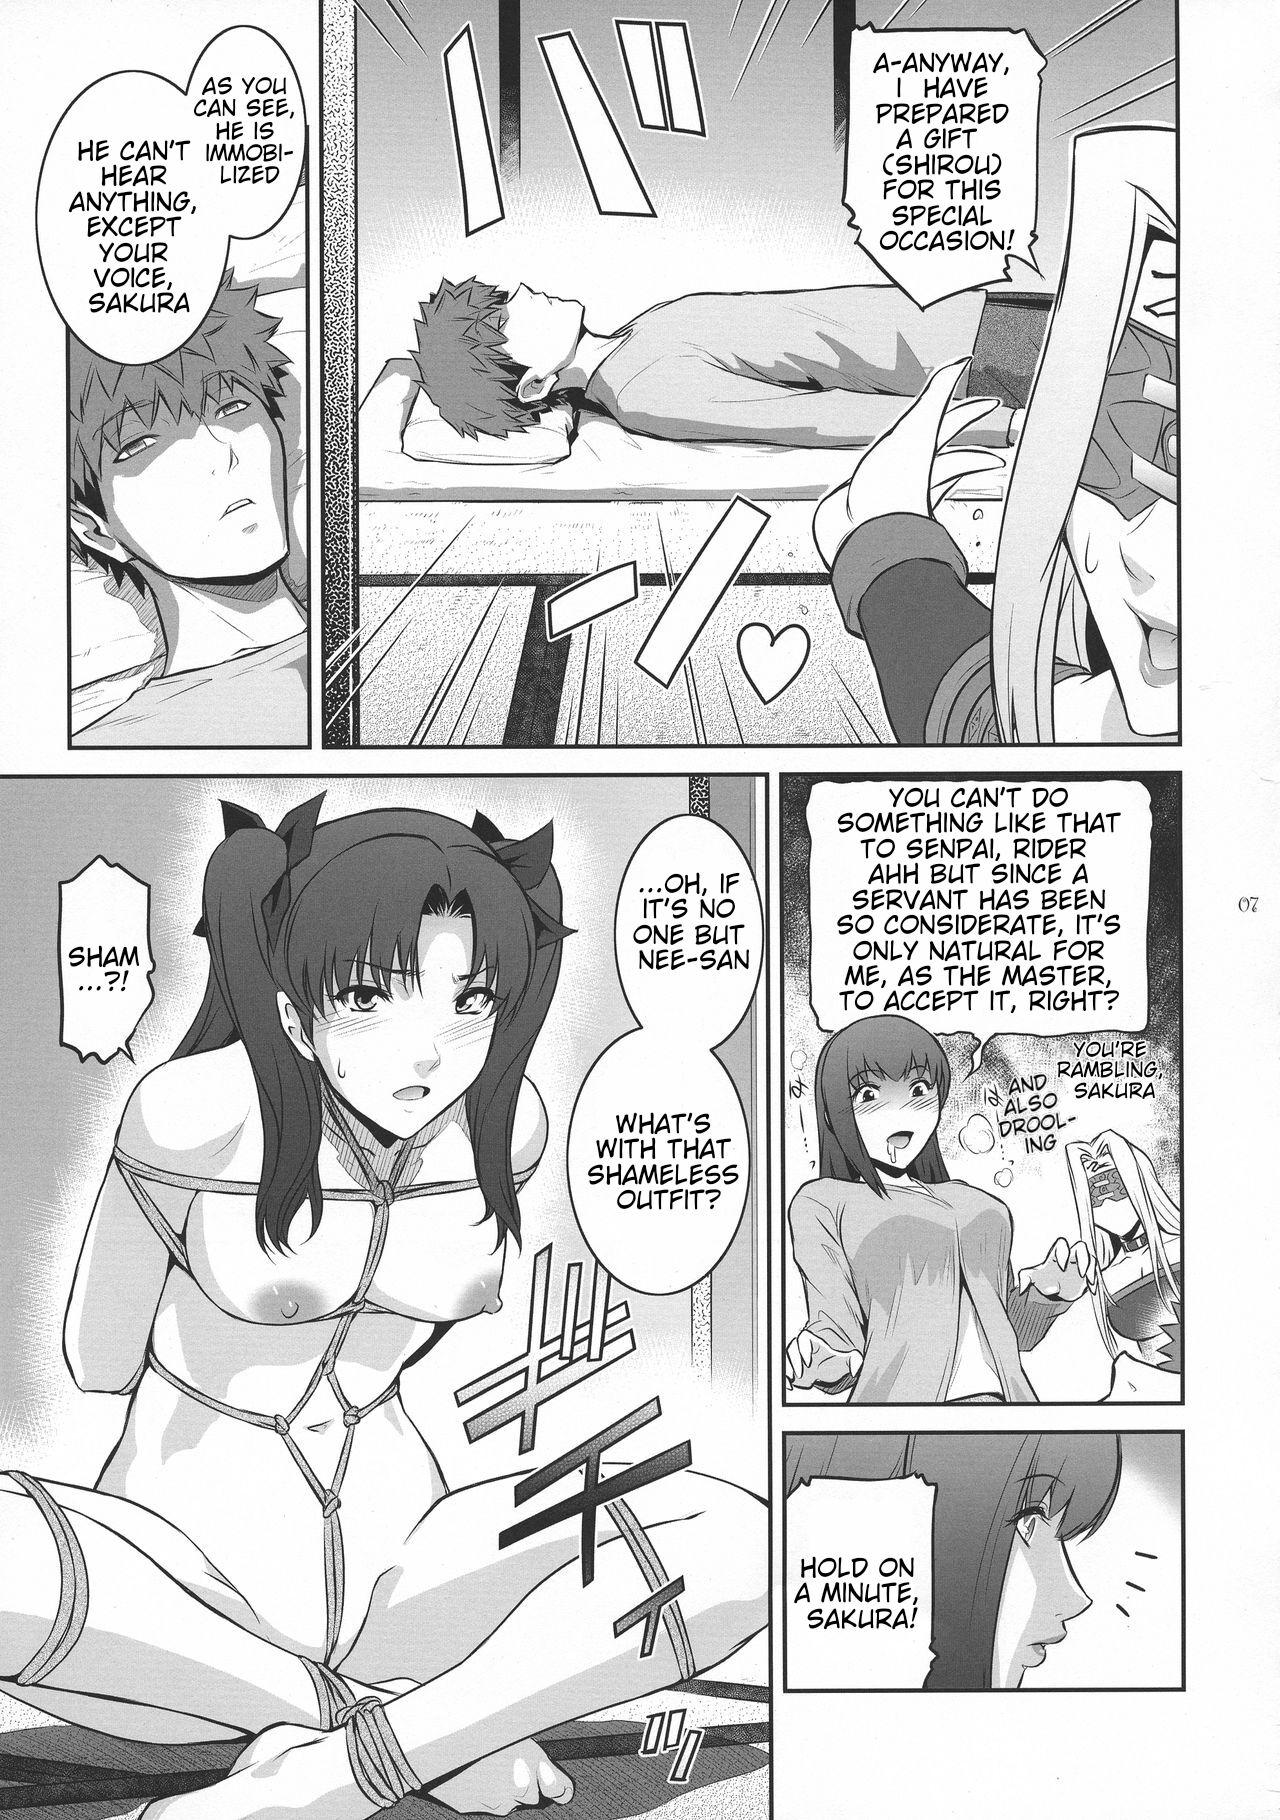 Reverse Cowgirl Sakura Wars - Fate stay night Gay Pissing - Page 7